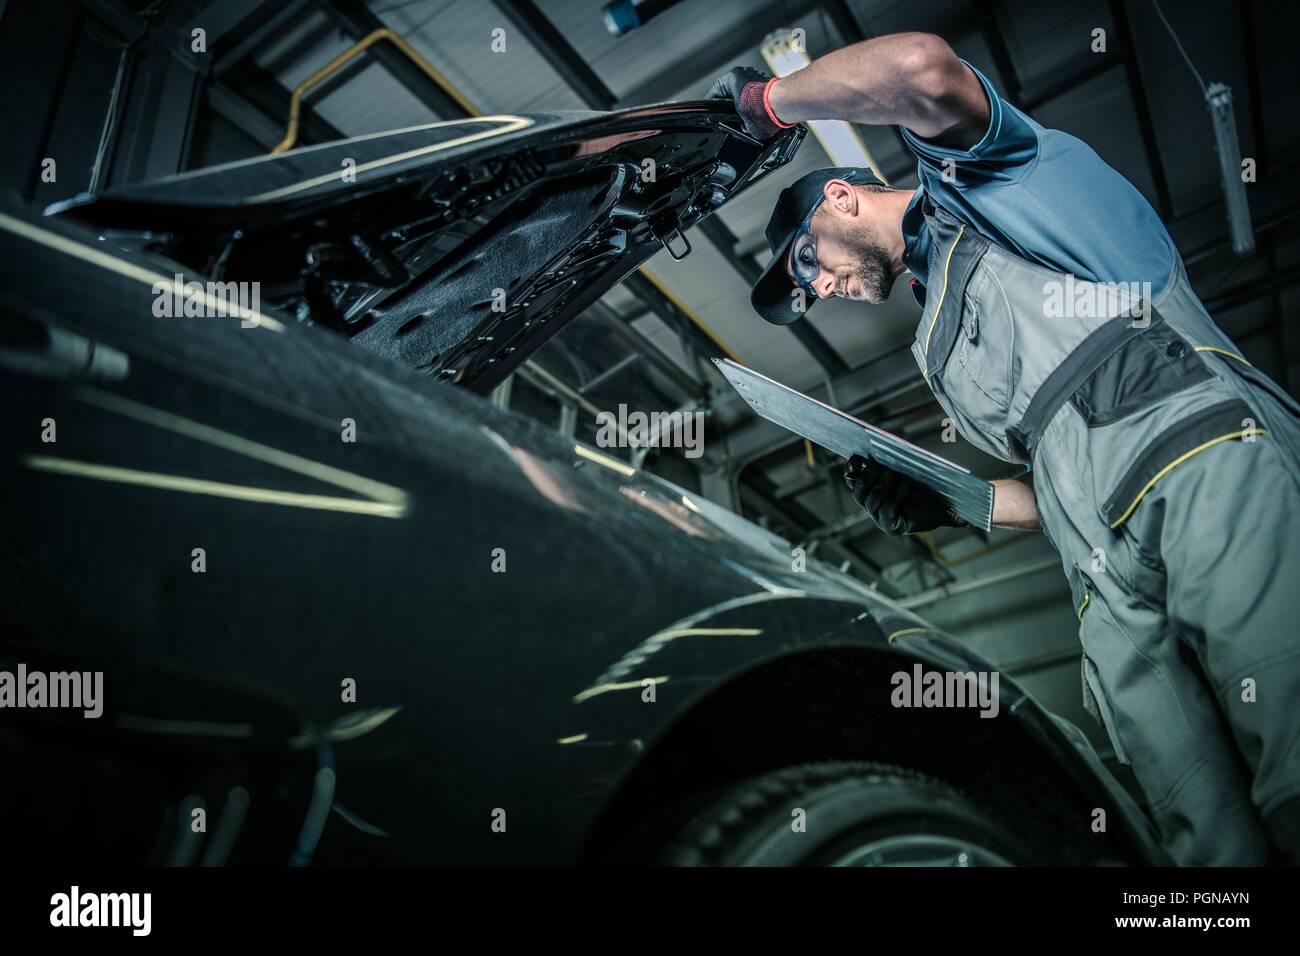 Servicing Modern Car. Pre Owned Vehicle Inside Auto Service. Caucasian Car Mechanic in His 30s Taking Look Under the Hood. Automotive Theme. Stock Photo